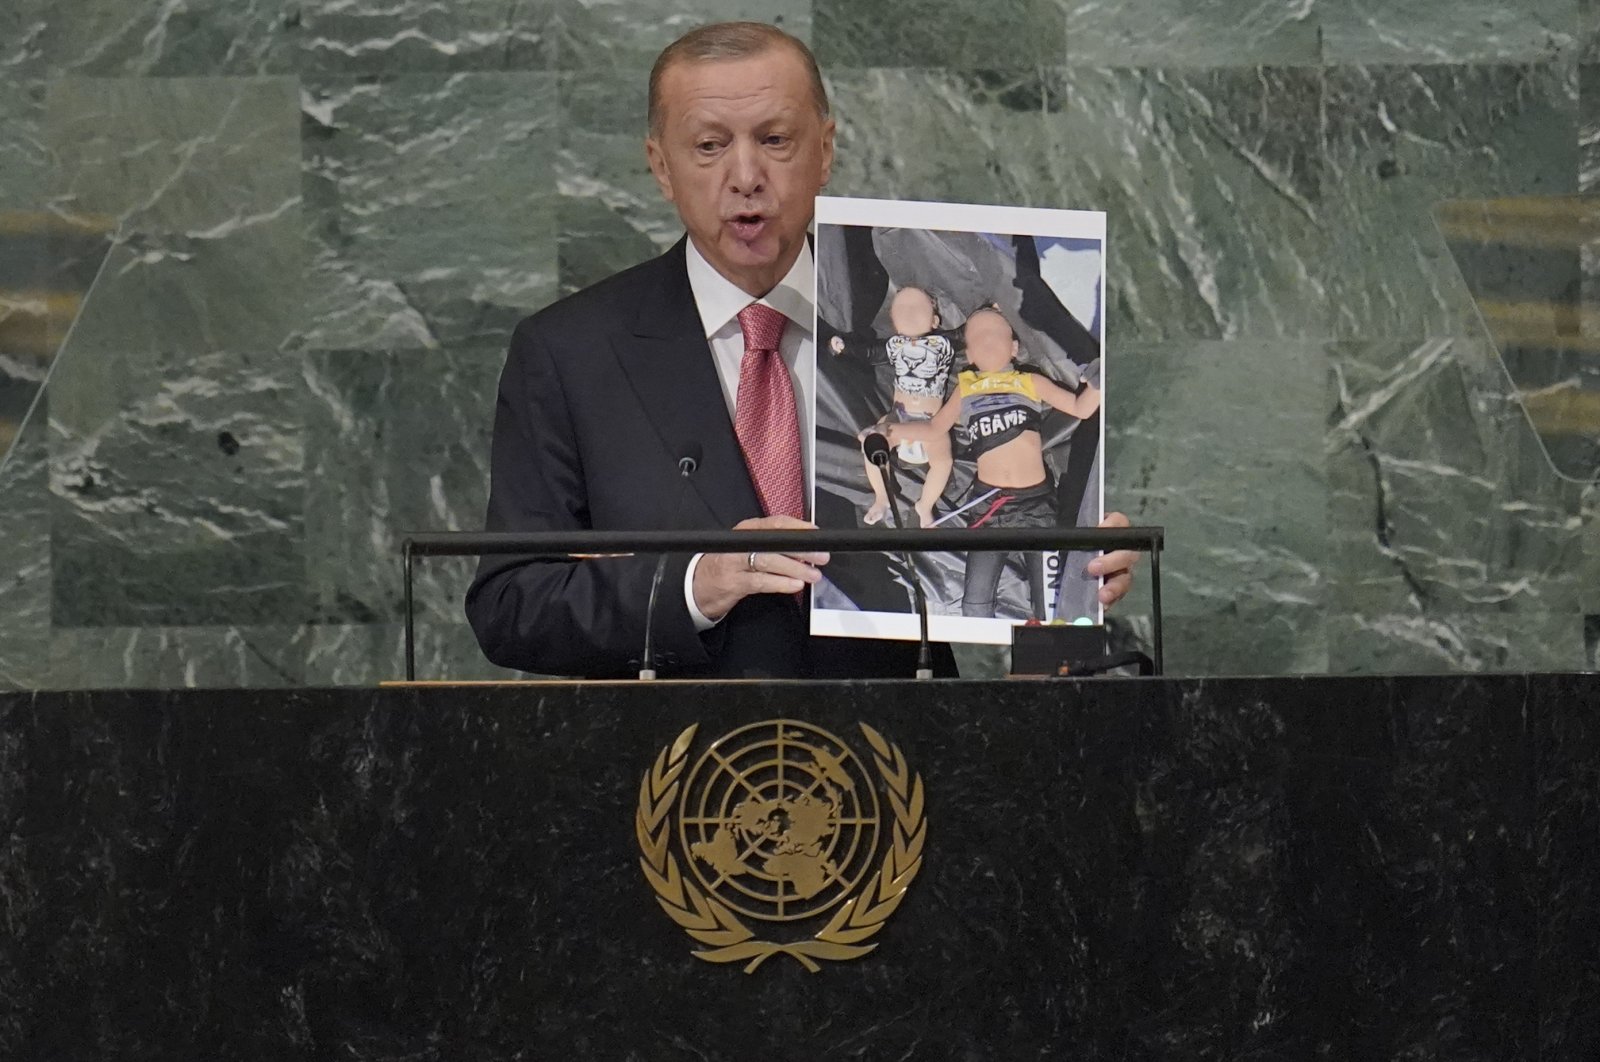 Türkiye President Recep Tayyip Erdogan holding the photo of Syrian refugee children addresses the 77th session of the United Nations General Assembly, Sept. 20, 2022 at U.N. headquarters. (AP Photo/Mary Altaffer)